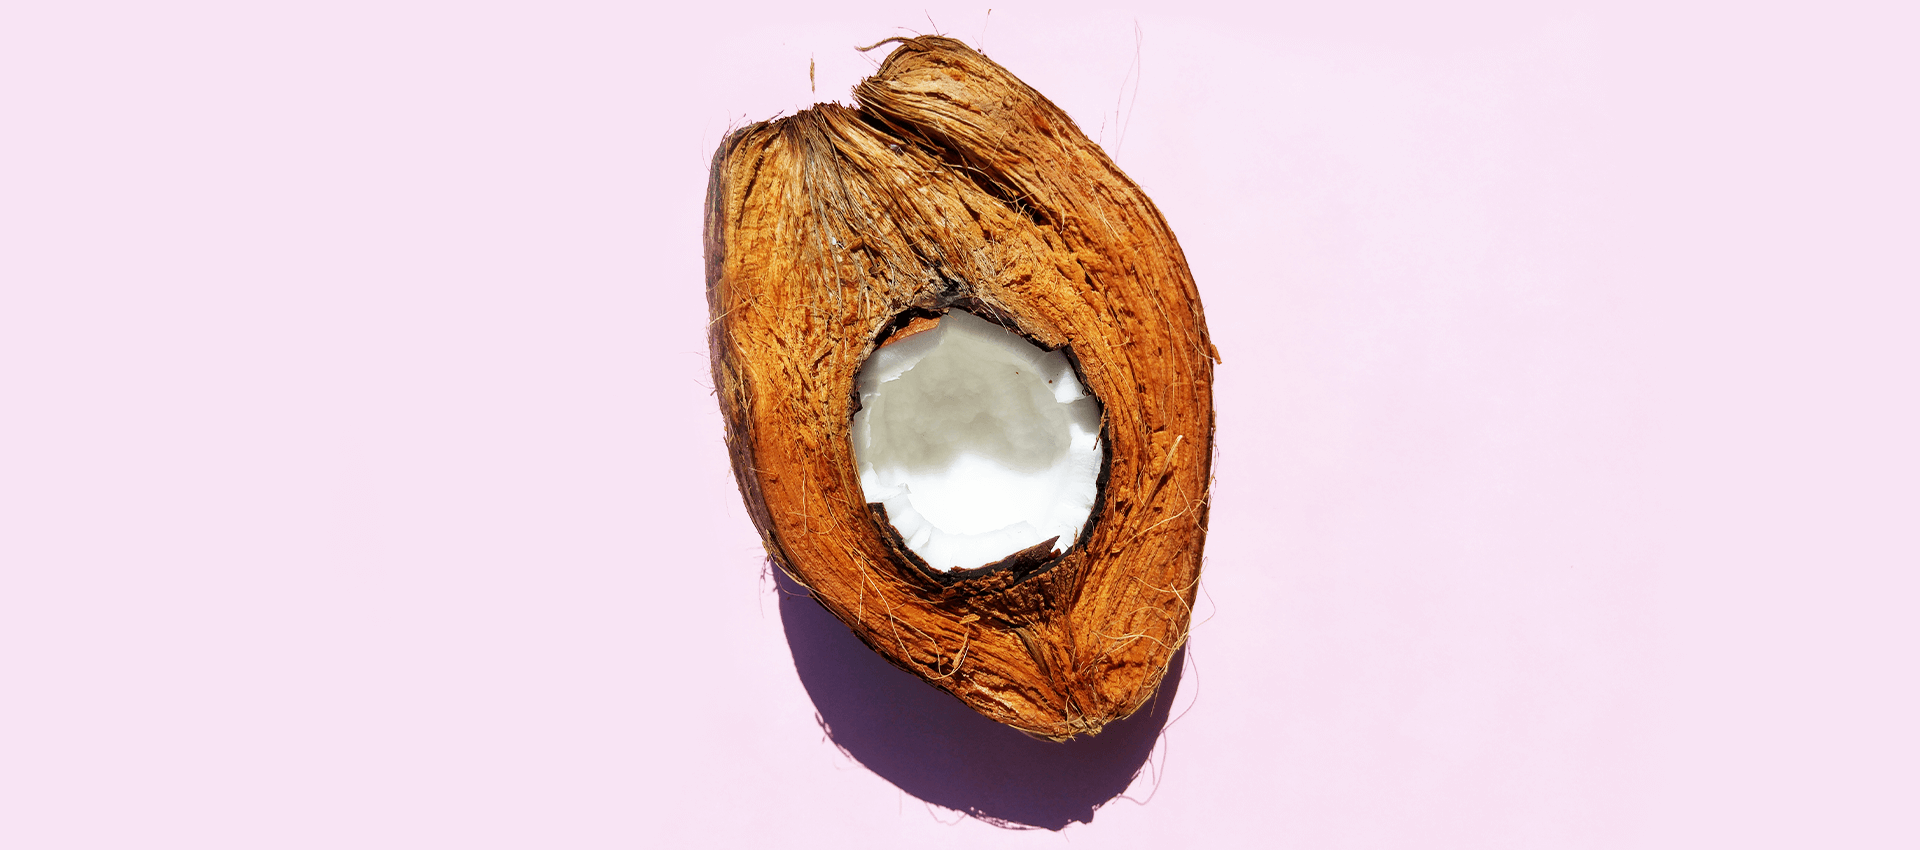 Is the coconut a nut, a seed or a fruit?